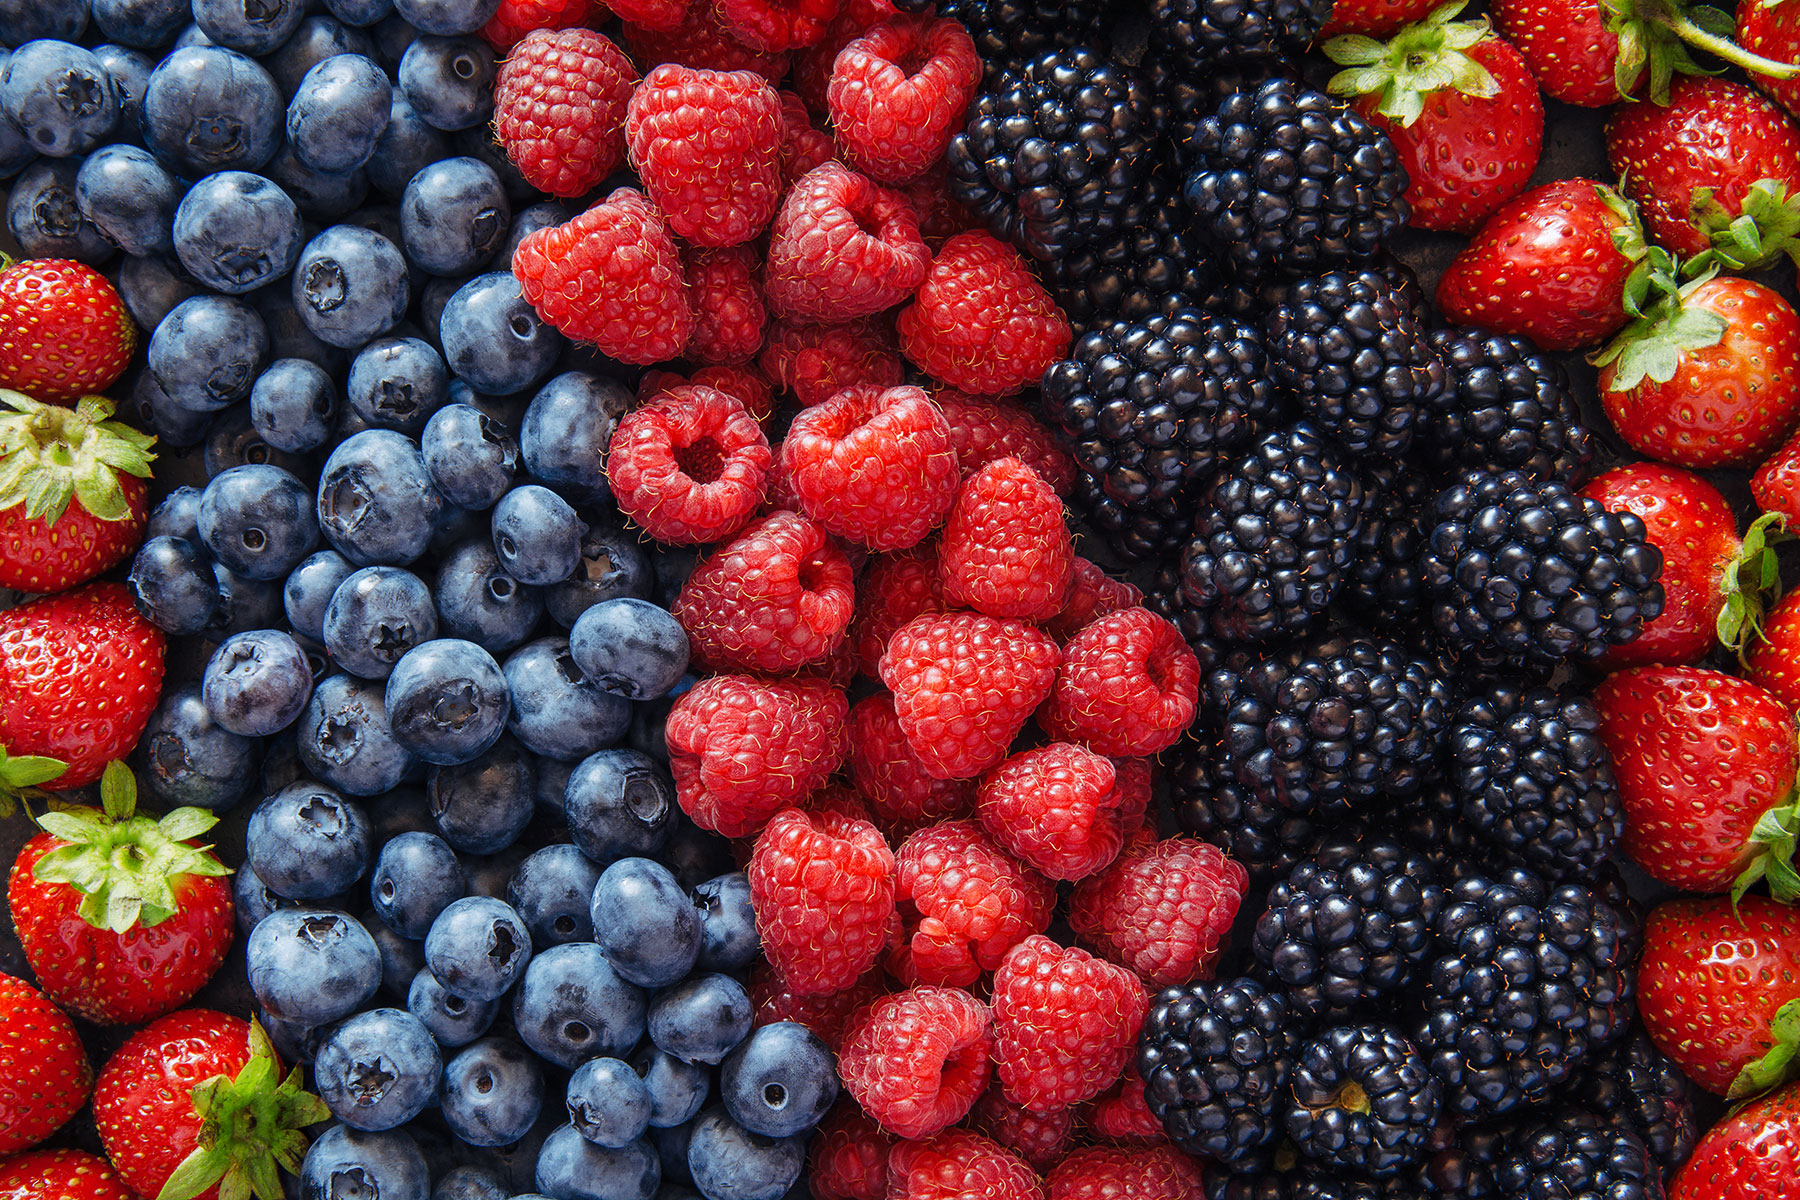 Tasty deal? Durham food tech startup cultivates plan to bring new breeds of berries to market